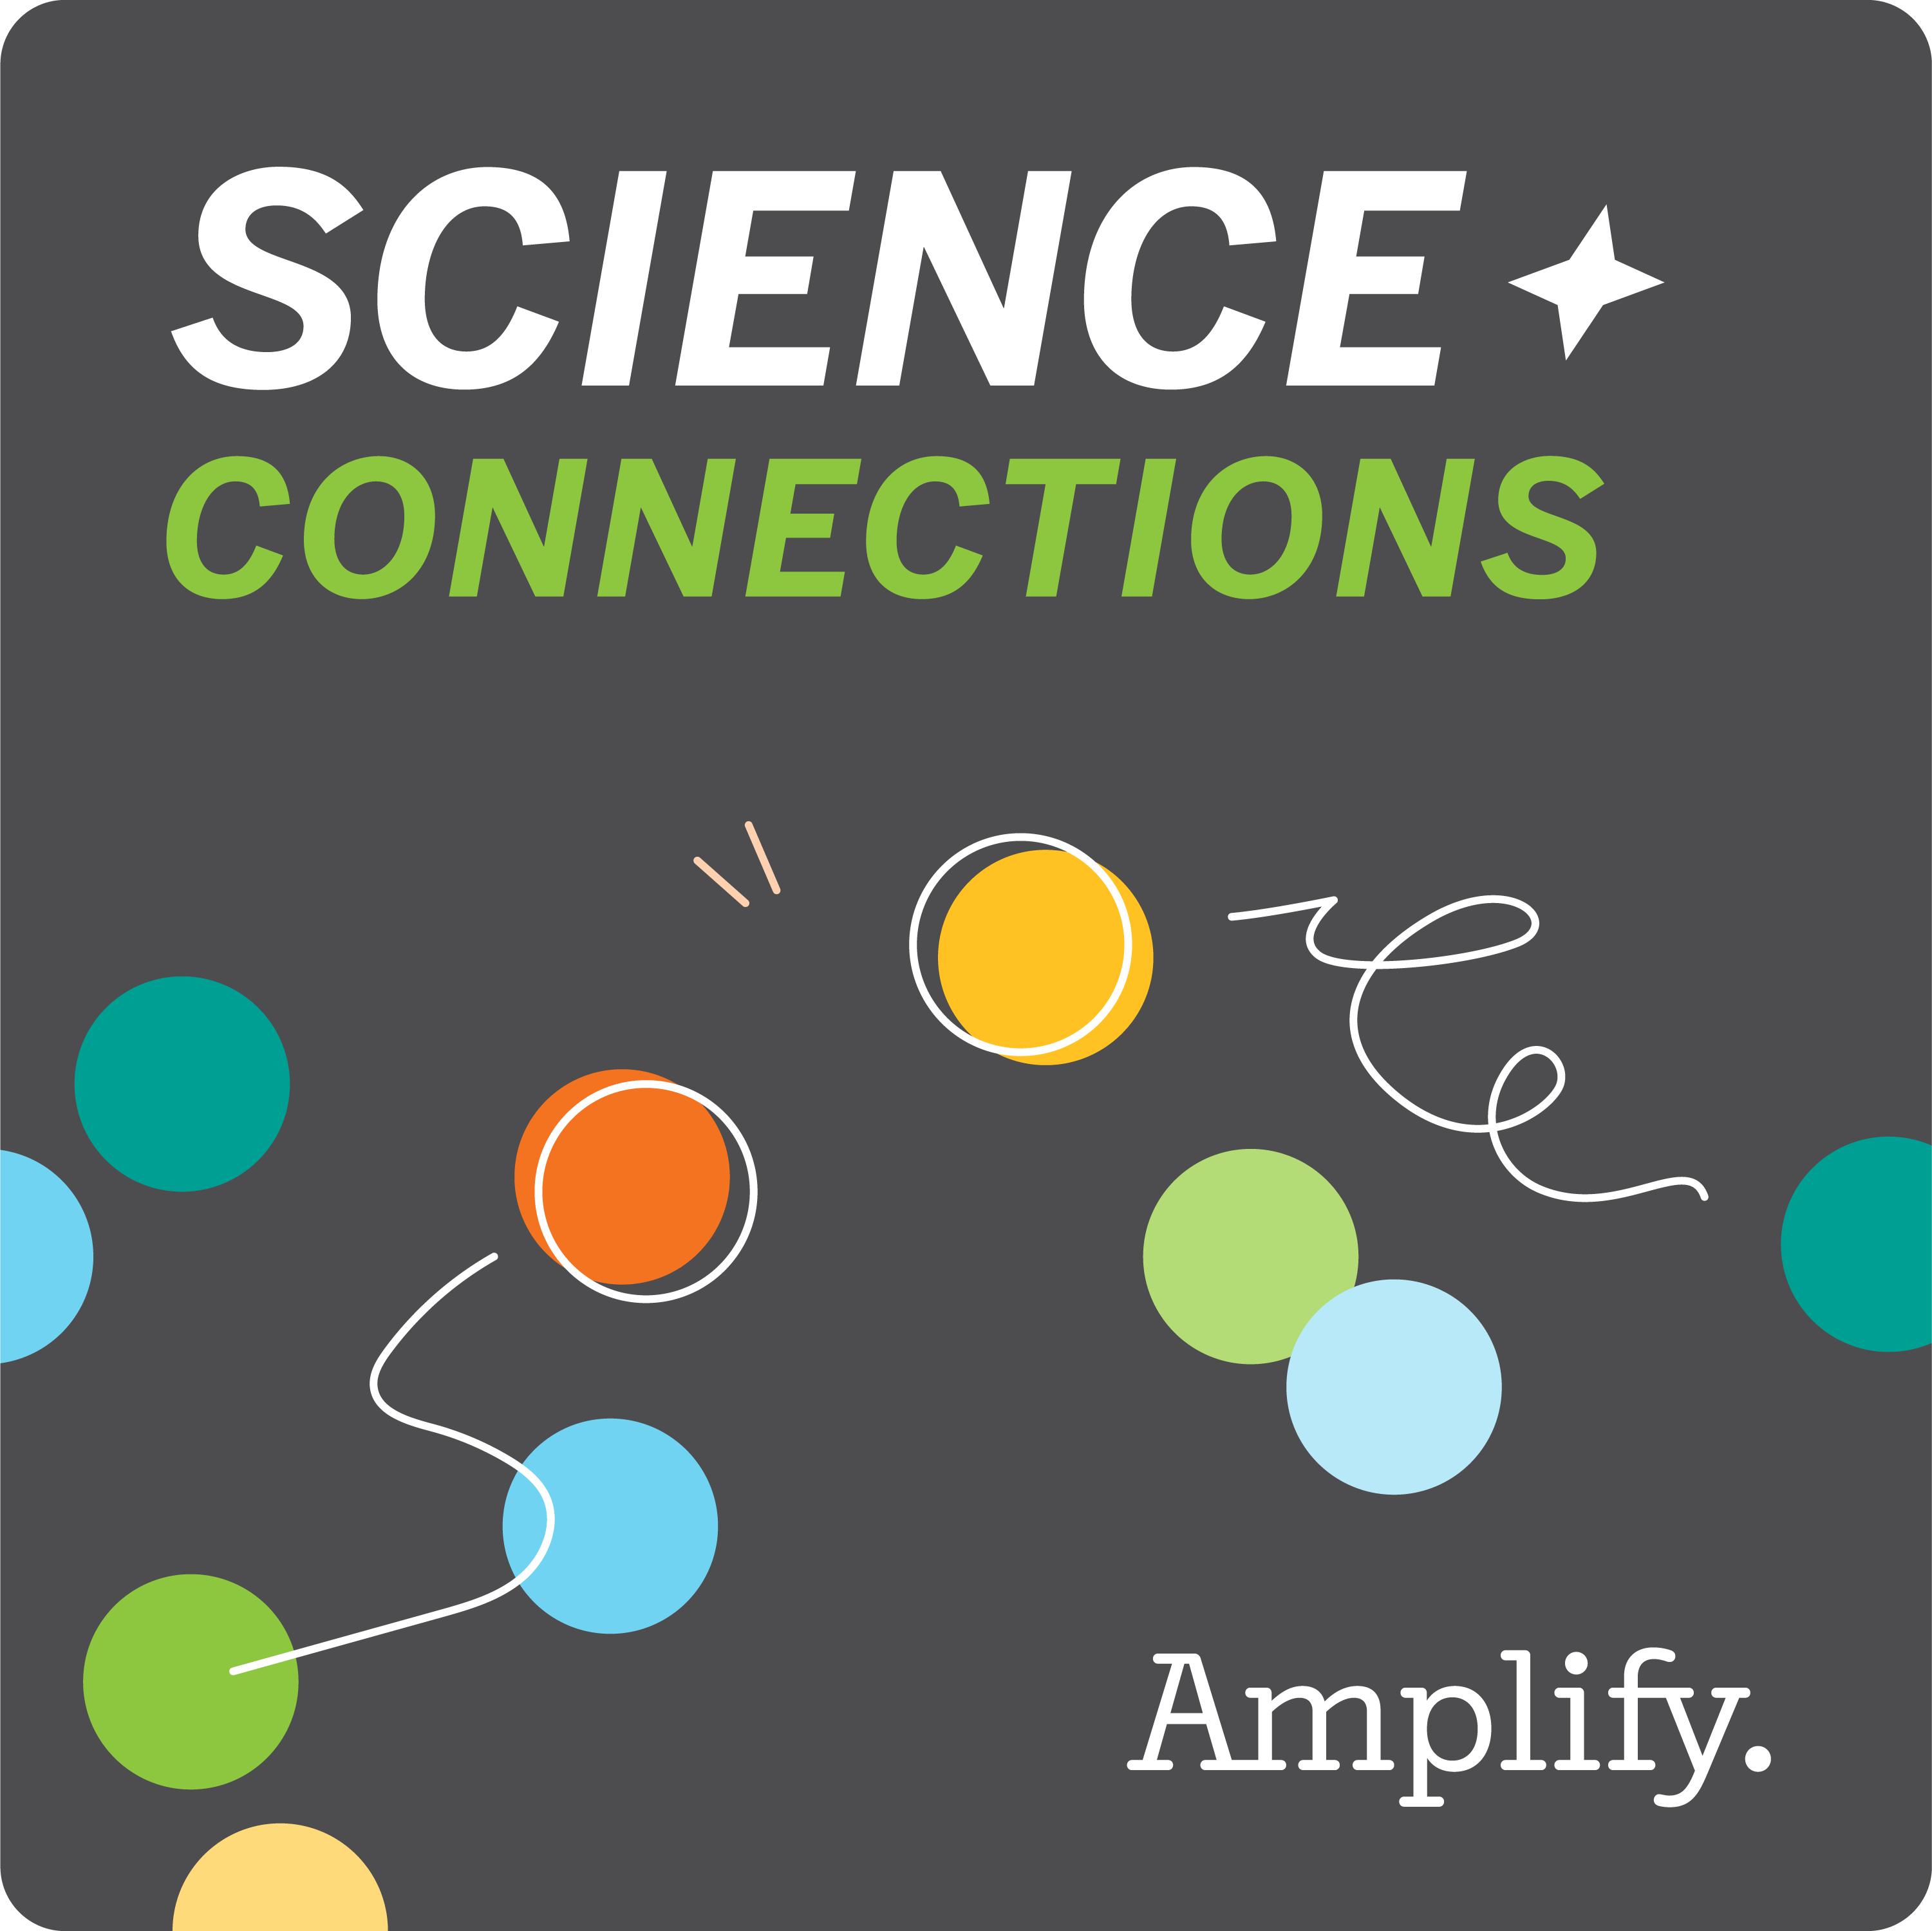 Science connections podcast cover image with colorful circles